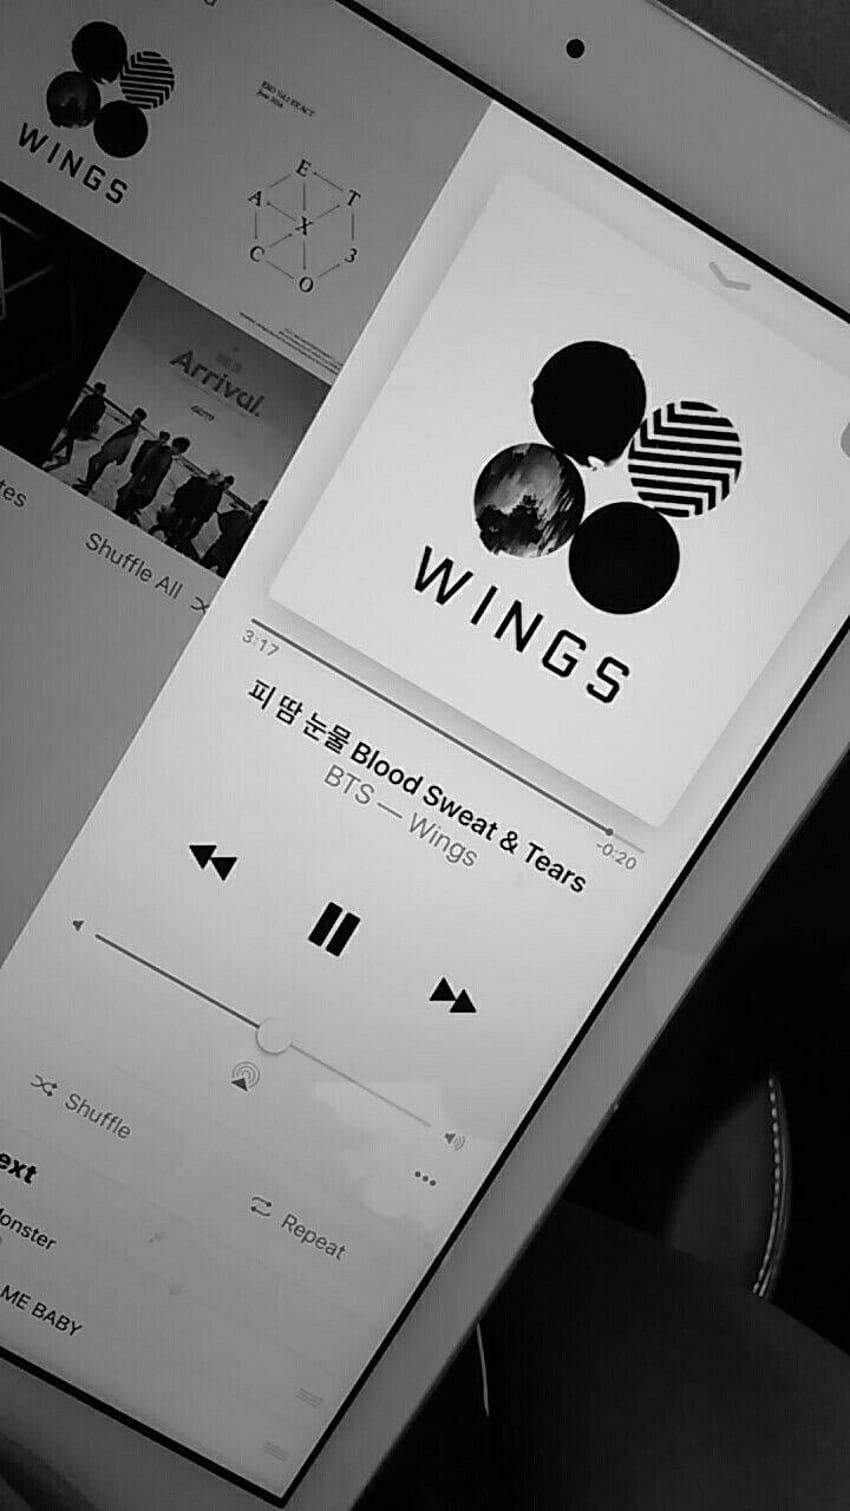 An iPhone screen displays the album cover for Wings by BTS. - Korean